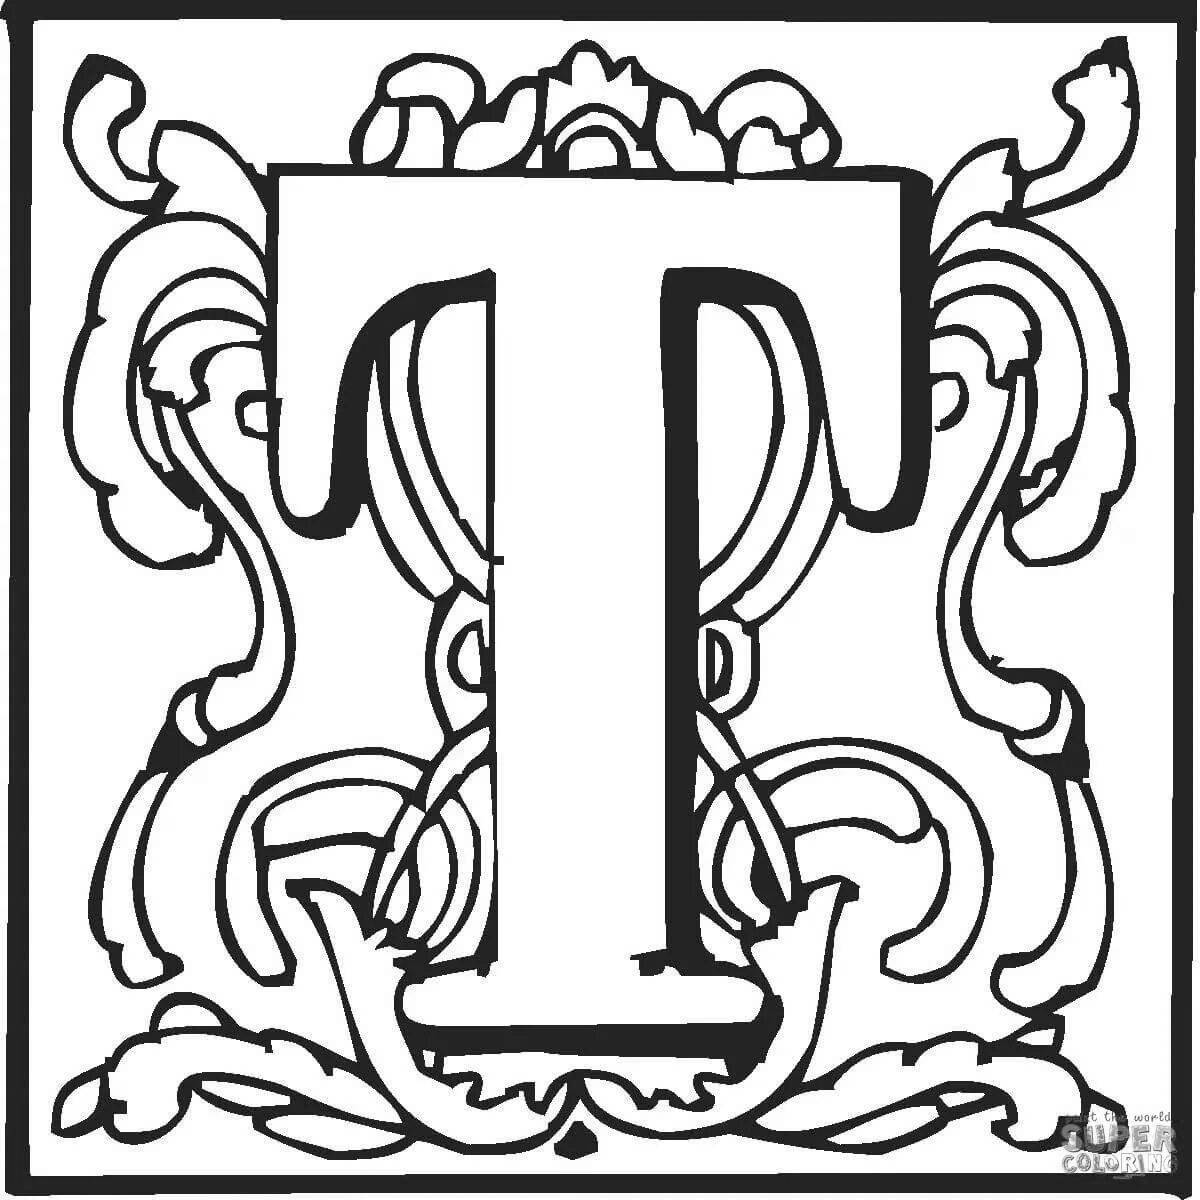 Charming coloring page slavic initial letter